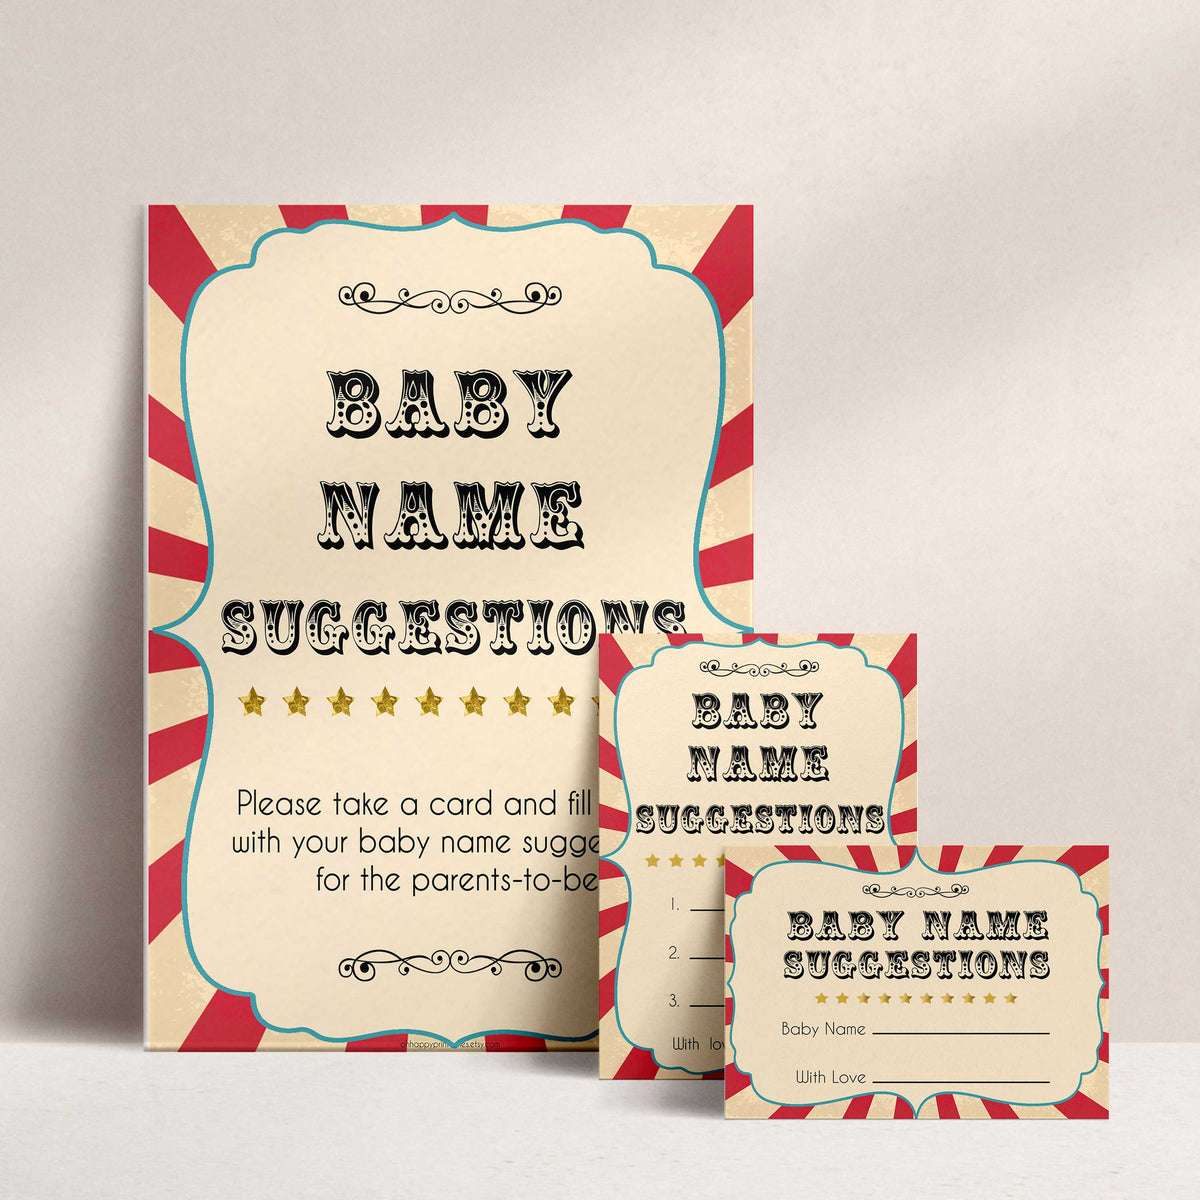 Circus baby name suggestions baby shower games, circus baby games, carnival baby games, printable baby games, fun baby games, popular baby games, carnival baby shower, carnival theme